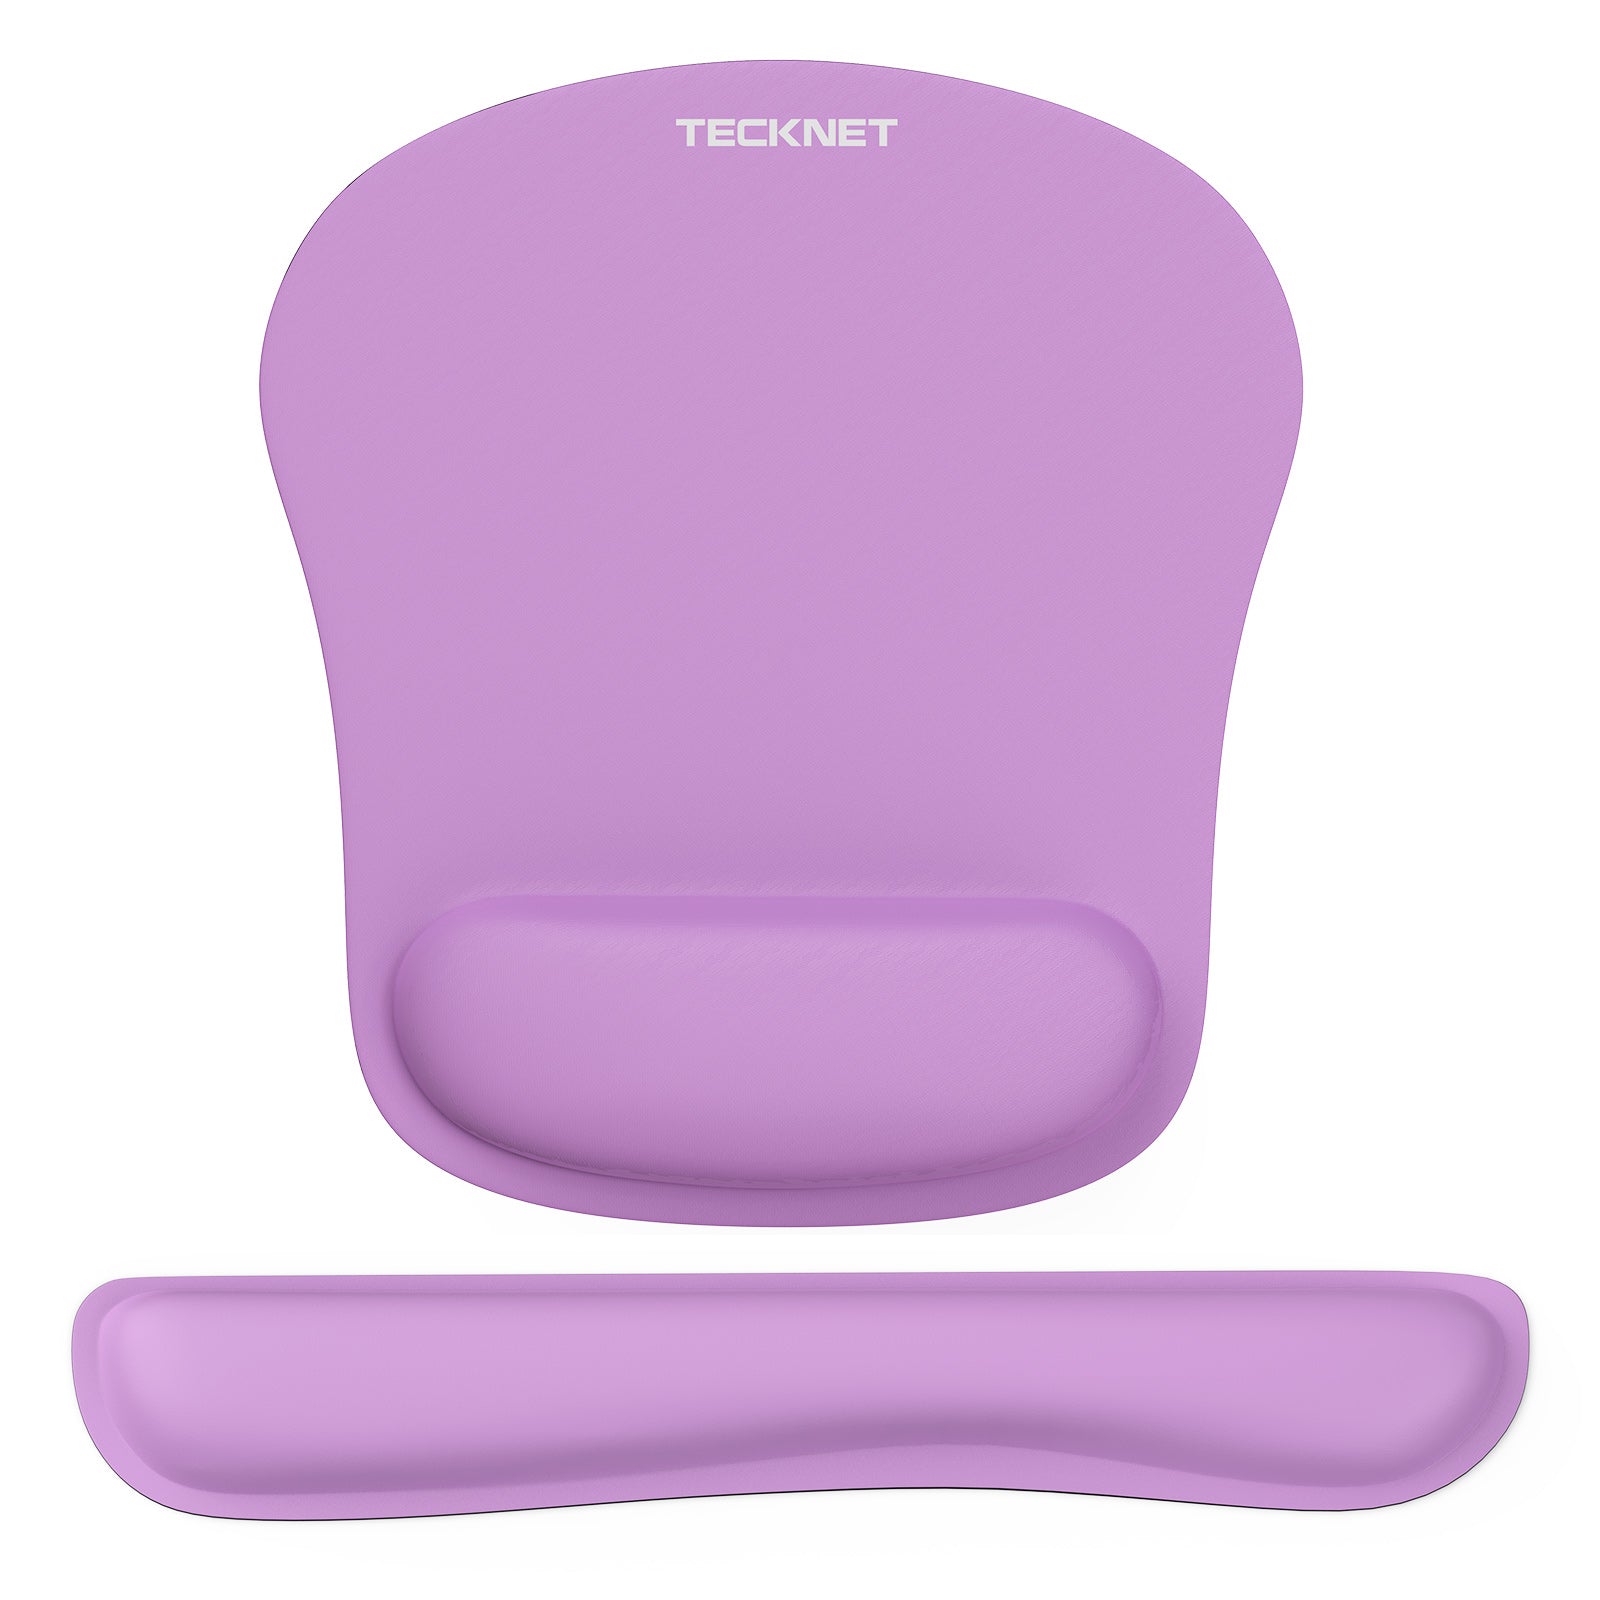 TECKNET Comfortable Mouse Pad With Wrist Support